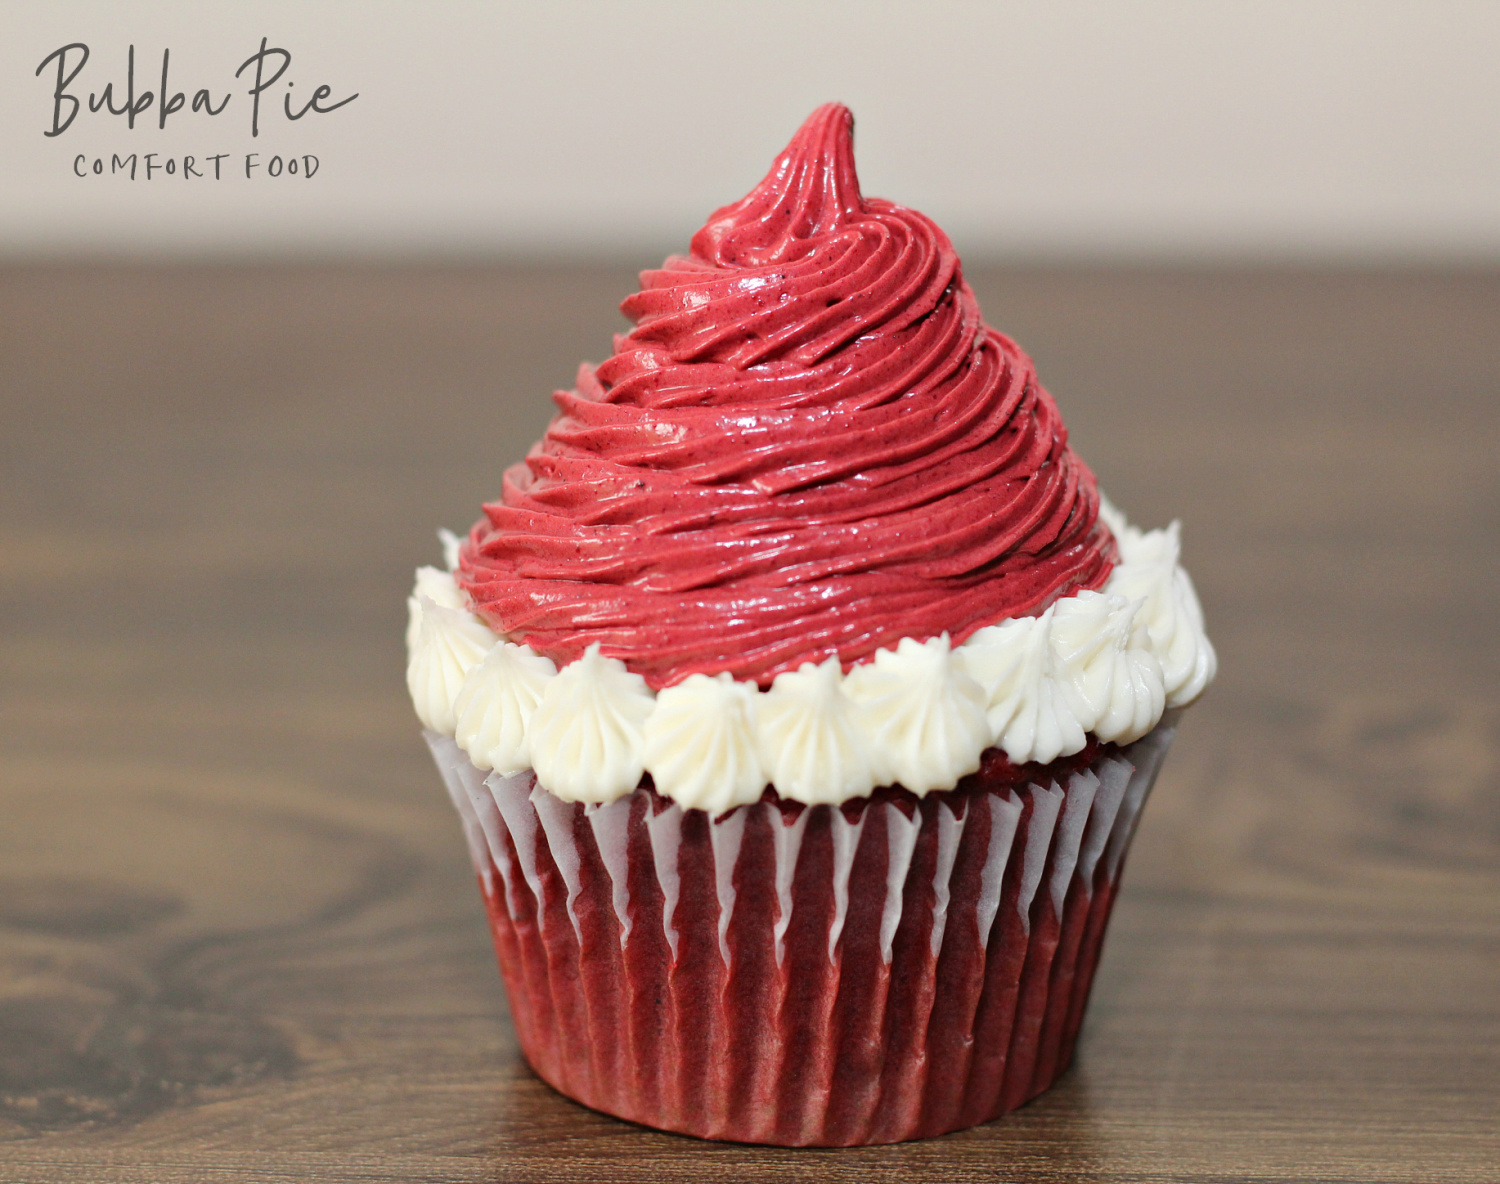 Lots of yummy red frosting on these easy Holiday Desserts